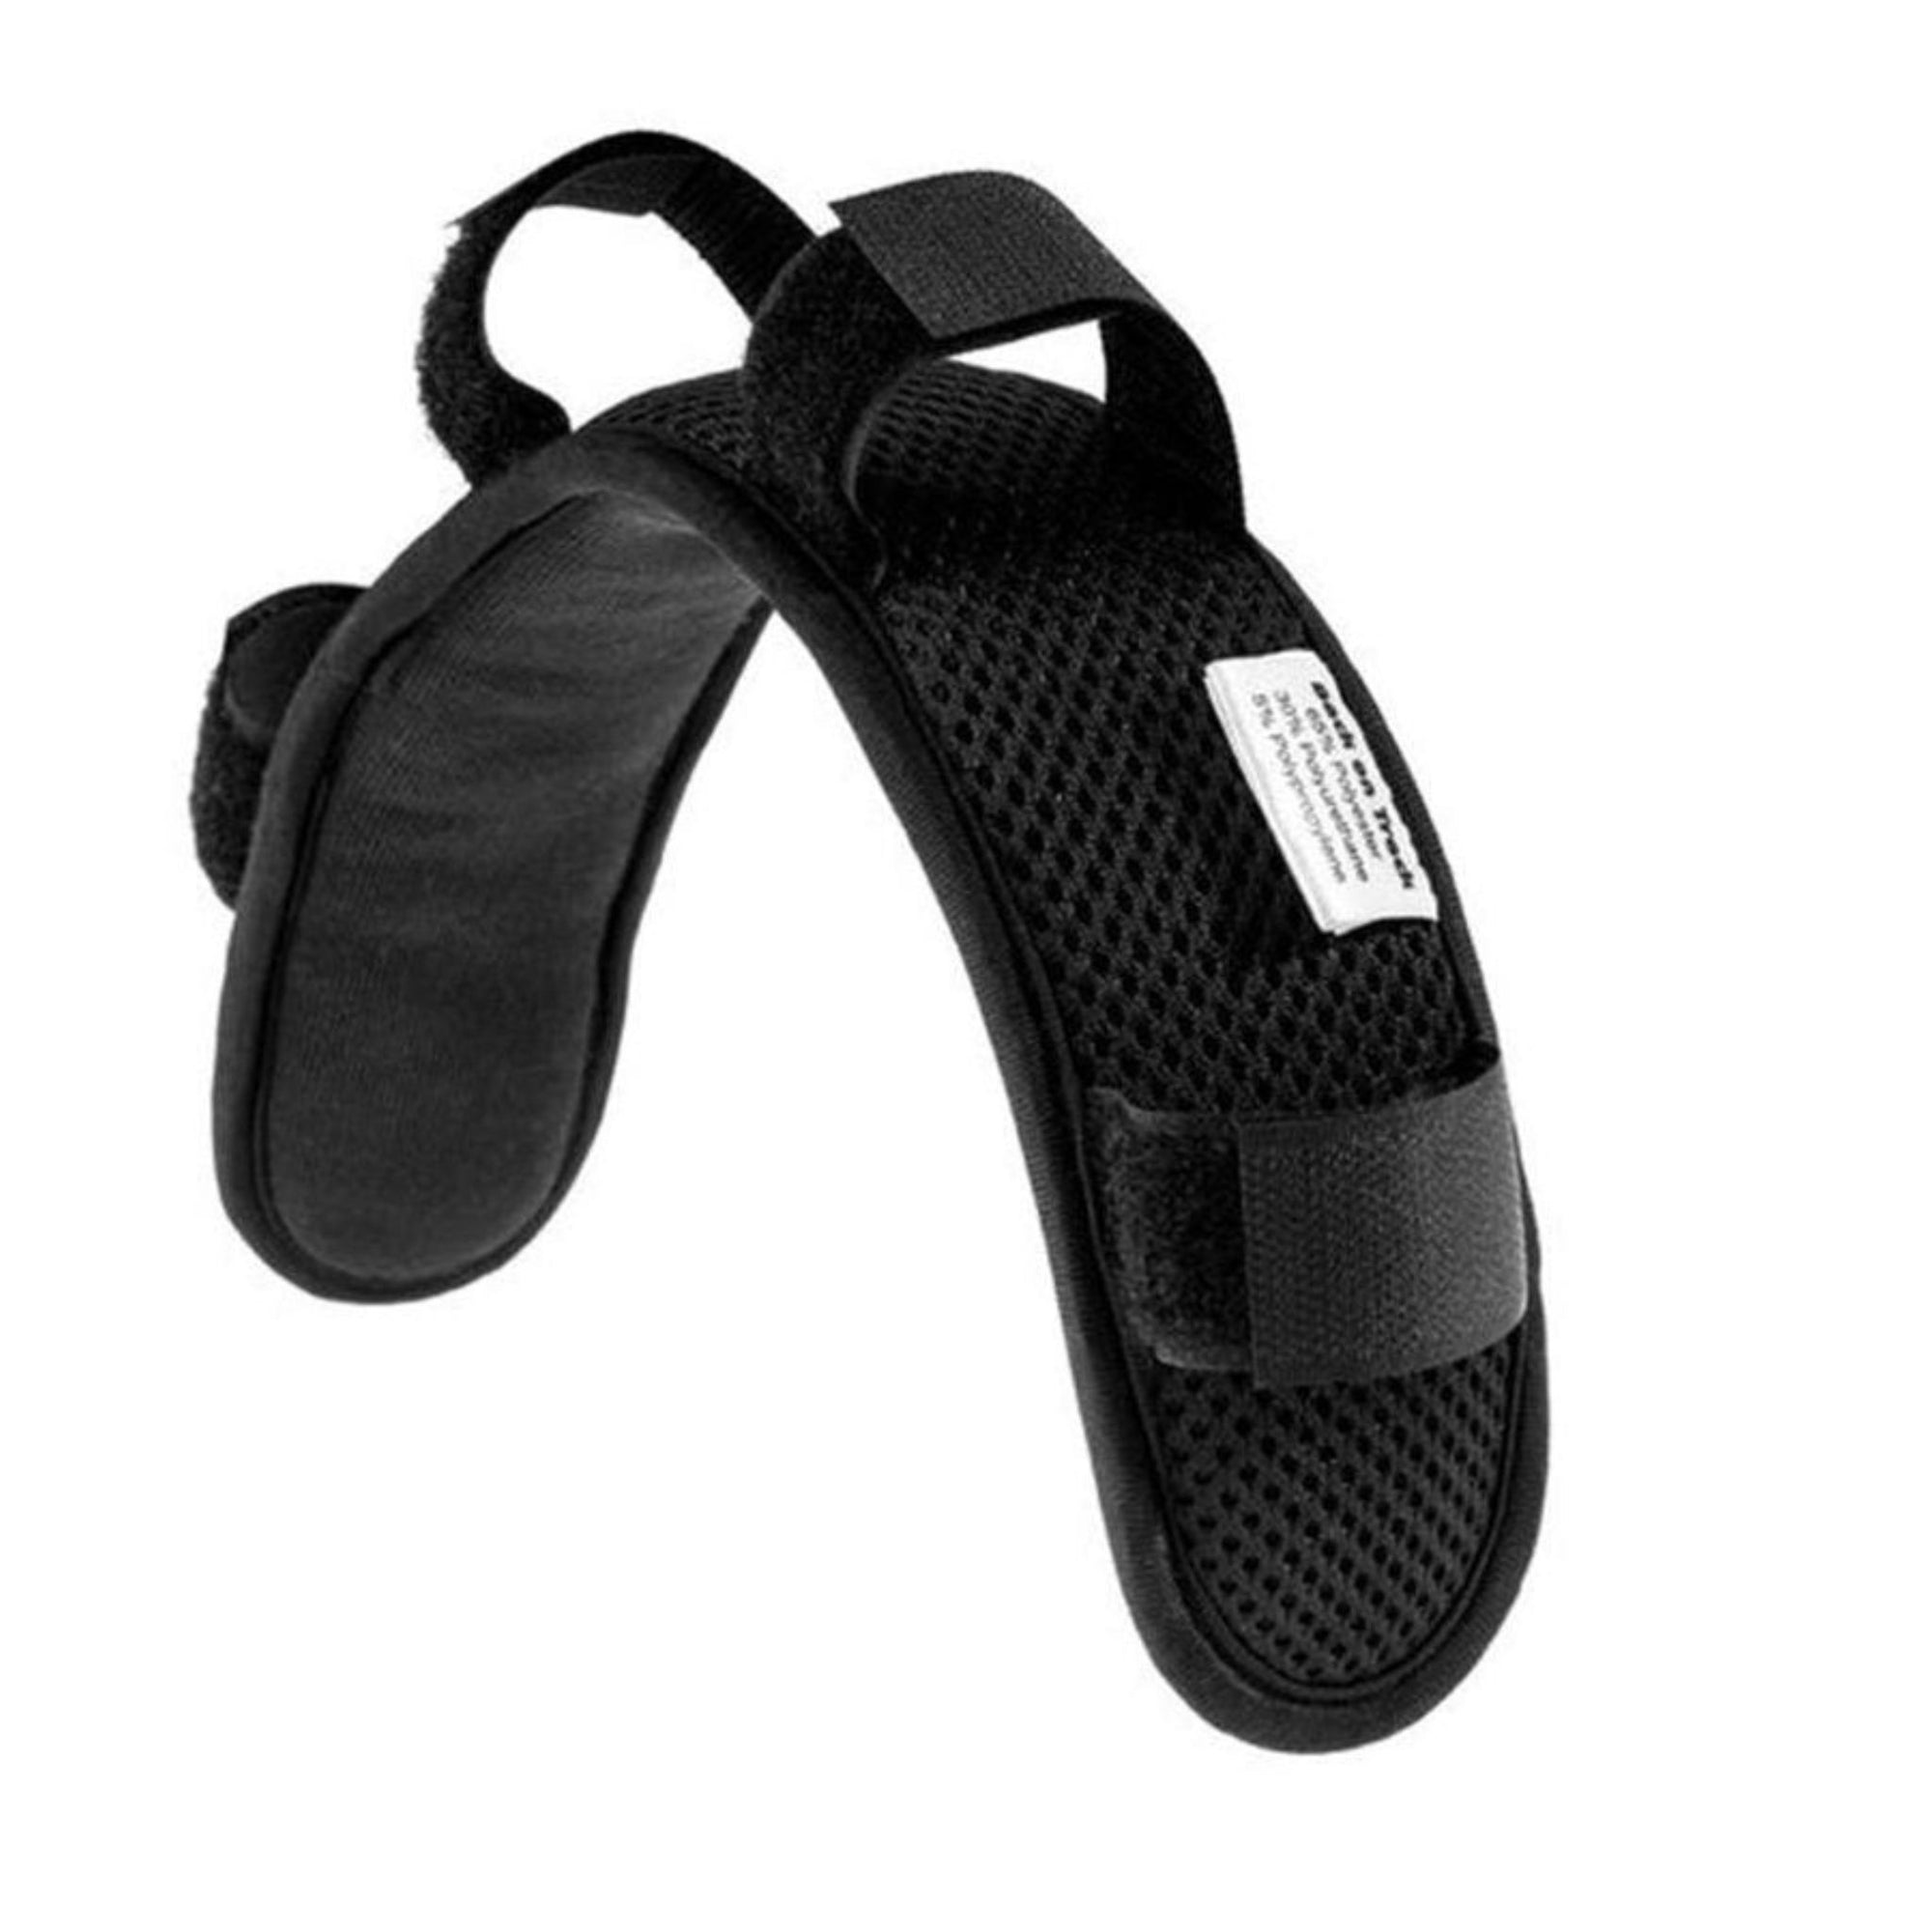 Black paddled poll cover with velcro adjustable straps.